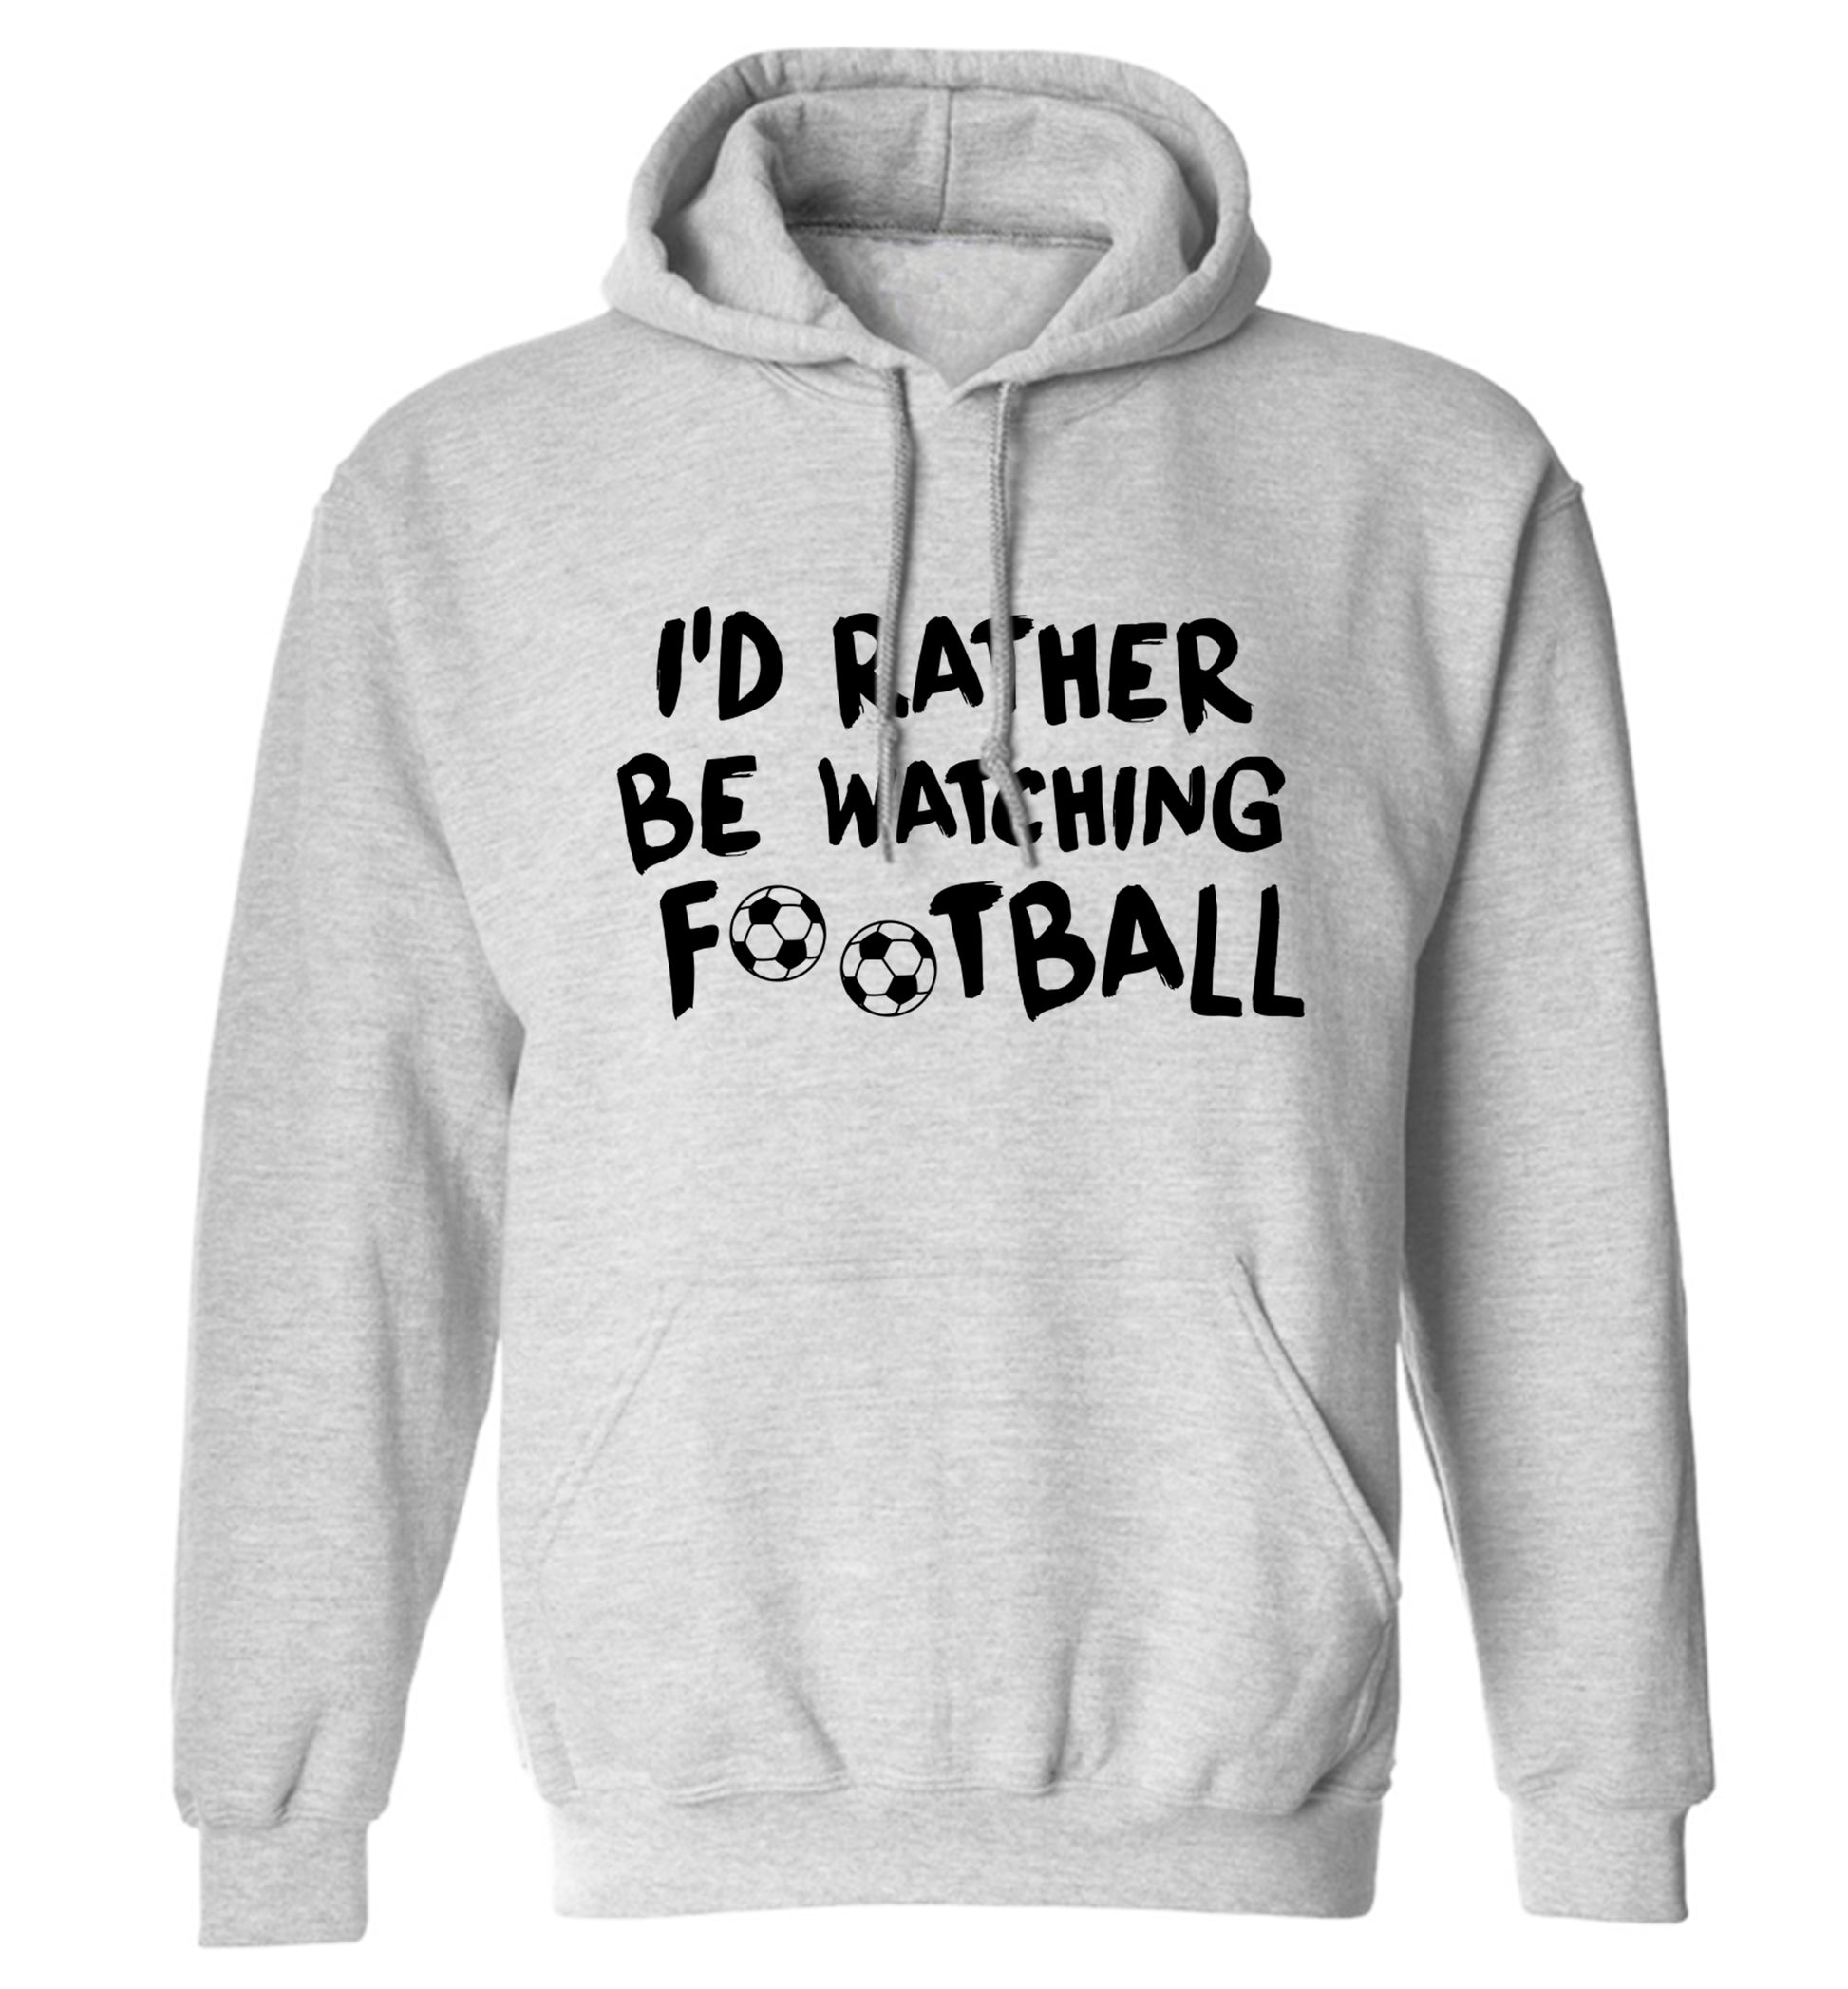 I'd rather be watching football adults unisexgrey hoodie 2XL